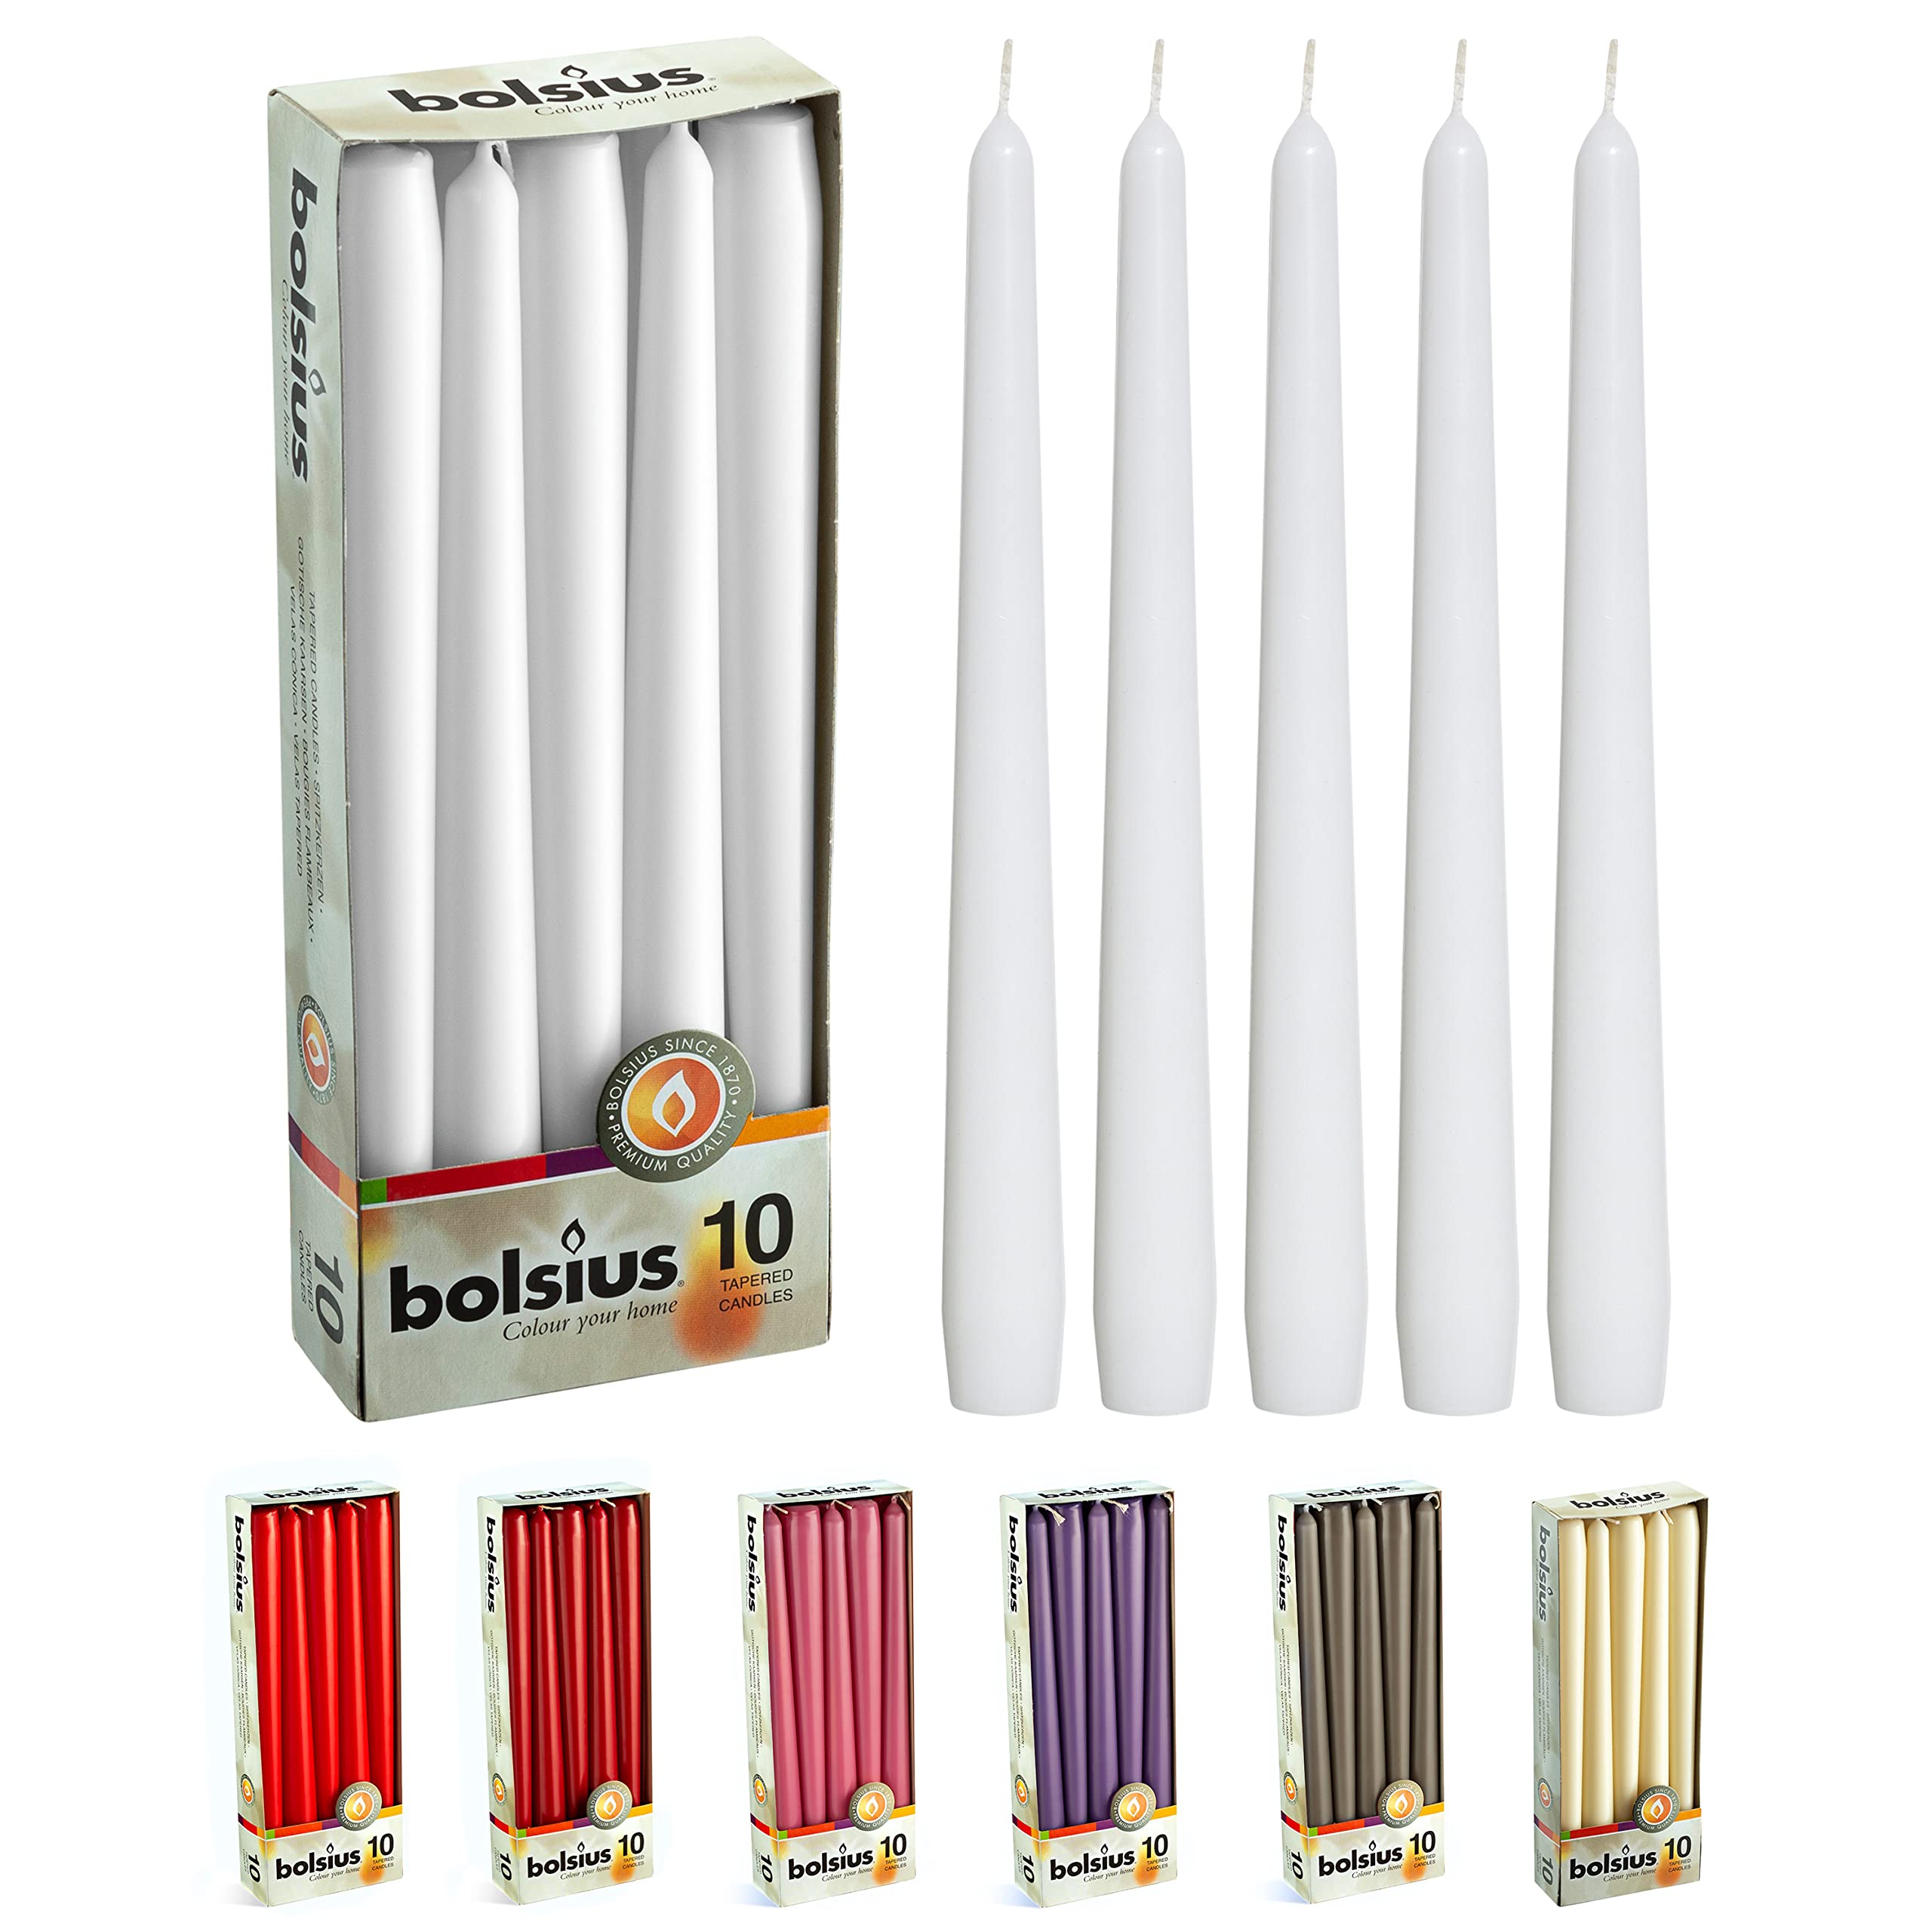 BOLSIUS Unscented 10 Inch Dinner Candles, 10 Pack - 8 Hour European Quality Smokeless Dripless Taper Candles for Home D�cor  - Like New